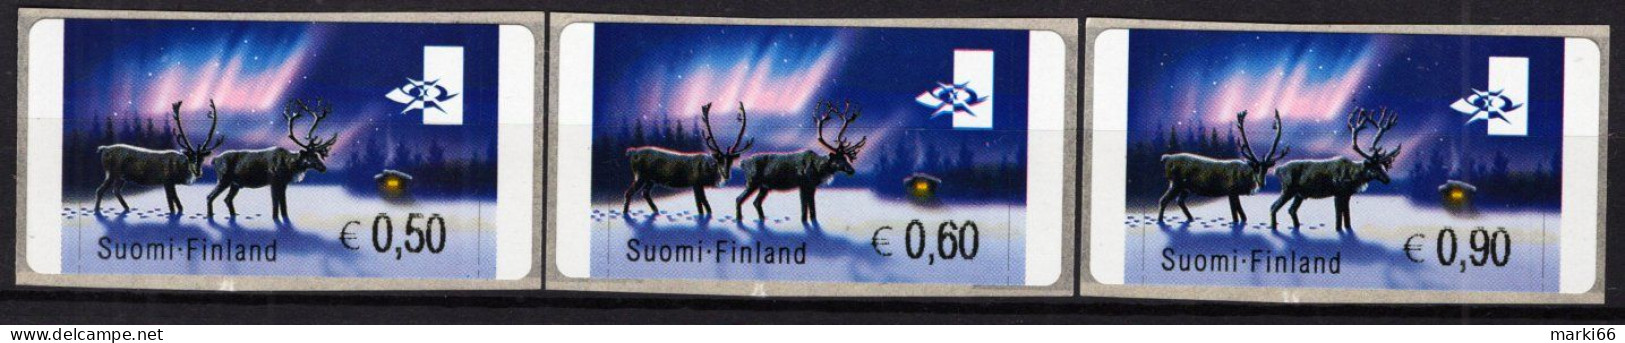 Finland - 2002 - Christmas - Northern Lights And Reindeers - Mint ATM Self-adhesive Stamp Set (EUR) - Automatenmarken [ATM]